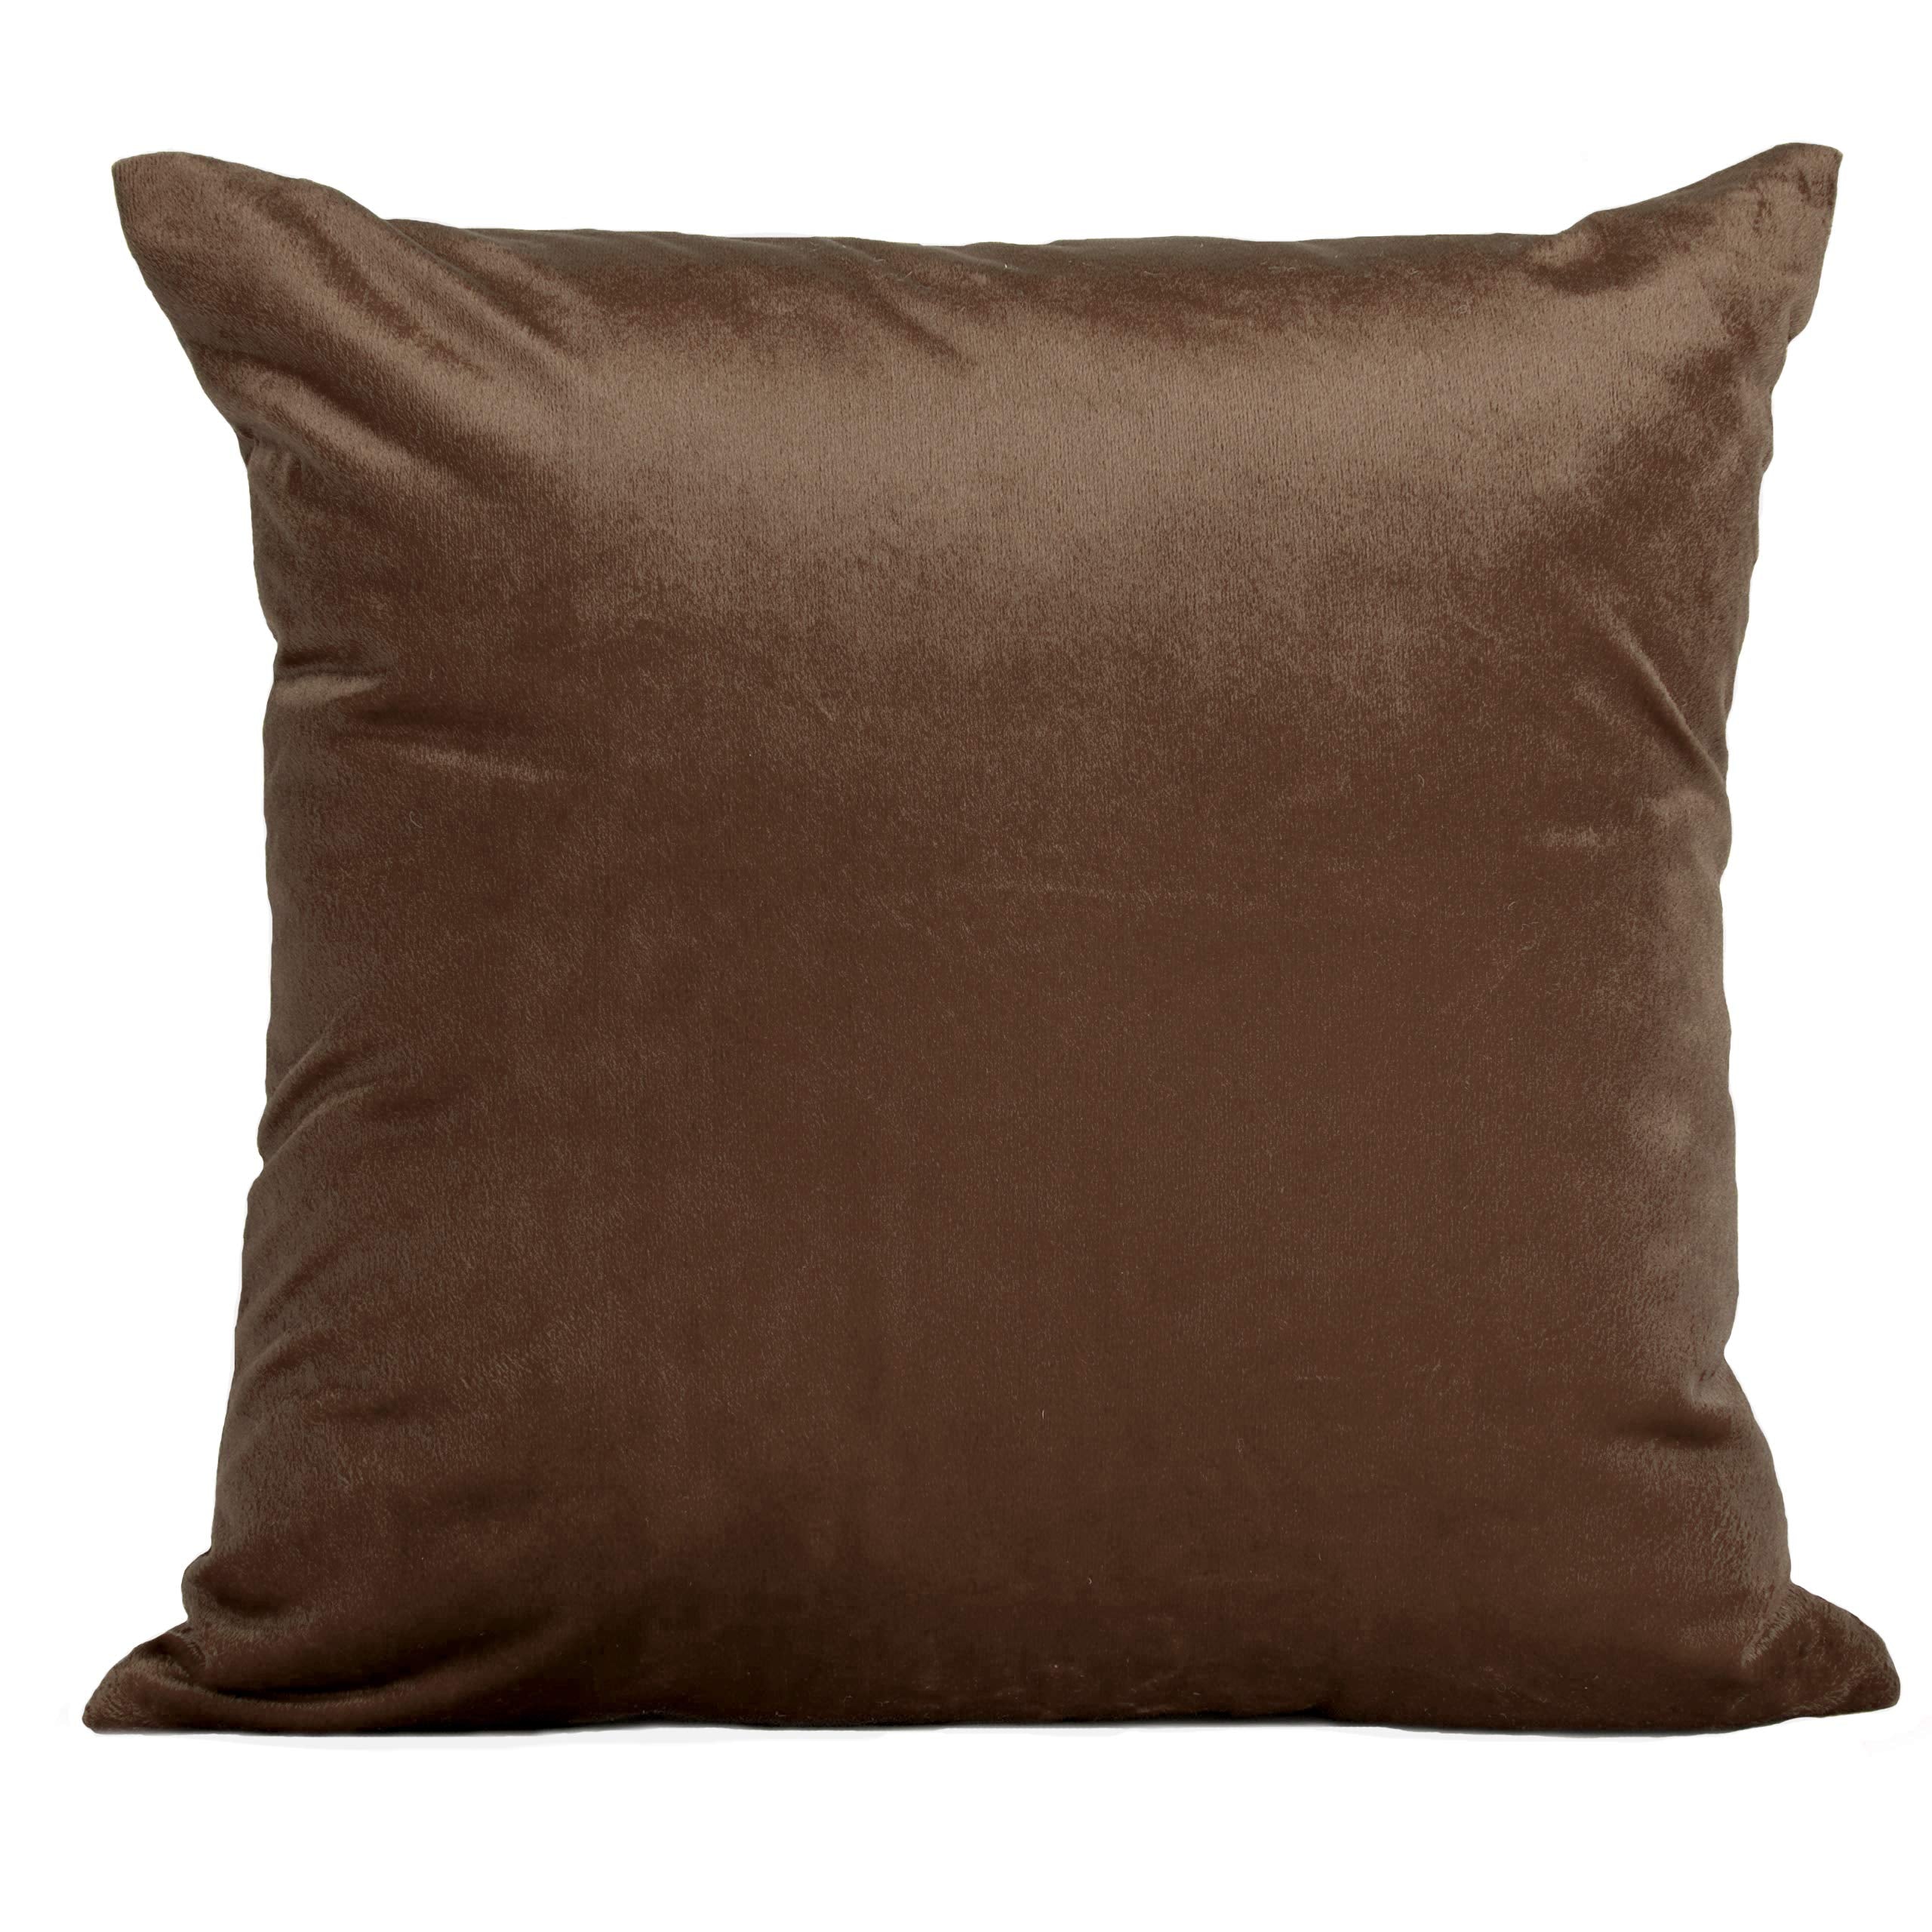 Encasa Homes Velvet Throw Pillow Cushion Covers 2 pc Set - Coffee - 20 x 20 inch / 50 x 50 cm Solid Plain Dyed Soft & Smooth, Square Accent Decorative Pillowcase for Couch, Sofa, Chair, Bed & Home